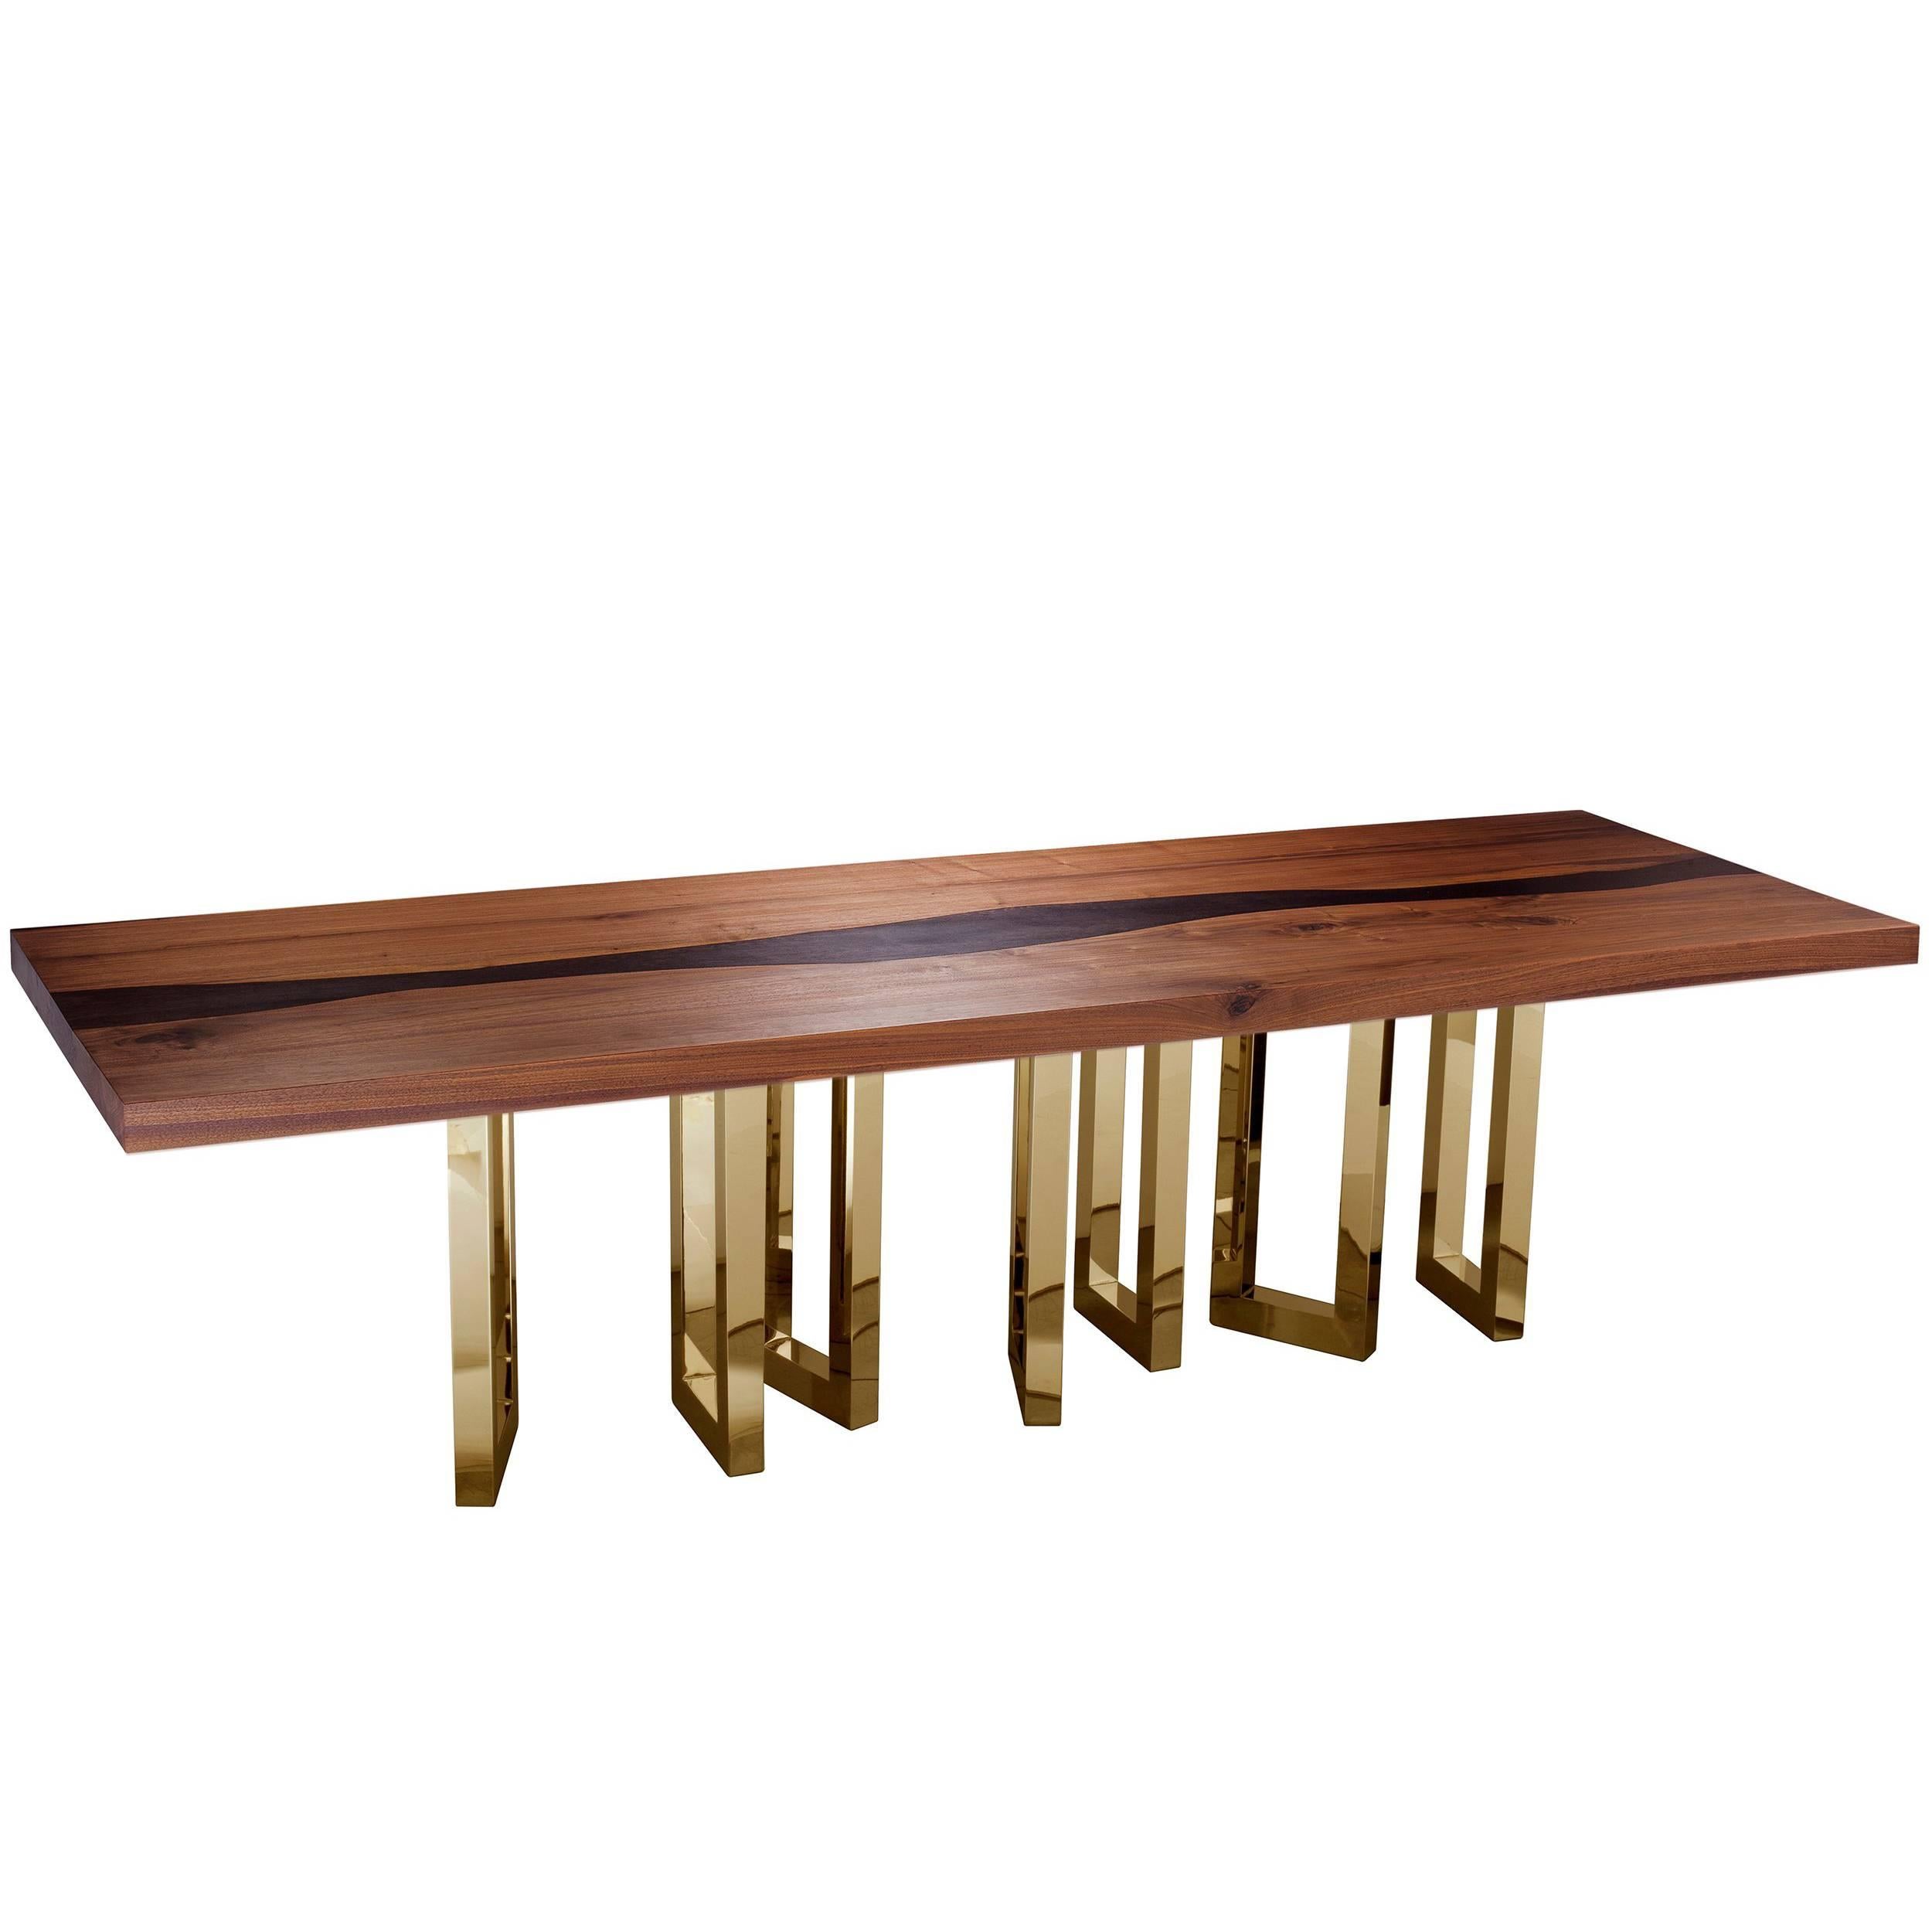 "Il Pezzo 6 Long Table" length 300cm/118” - solid walnut and wenge - brass base